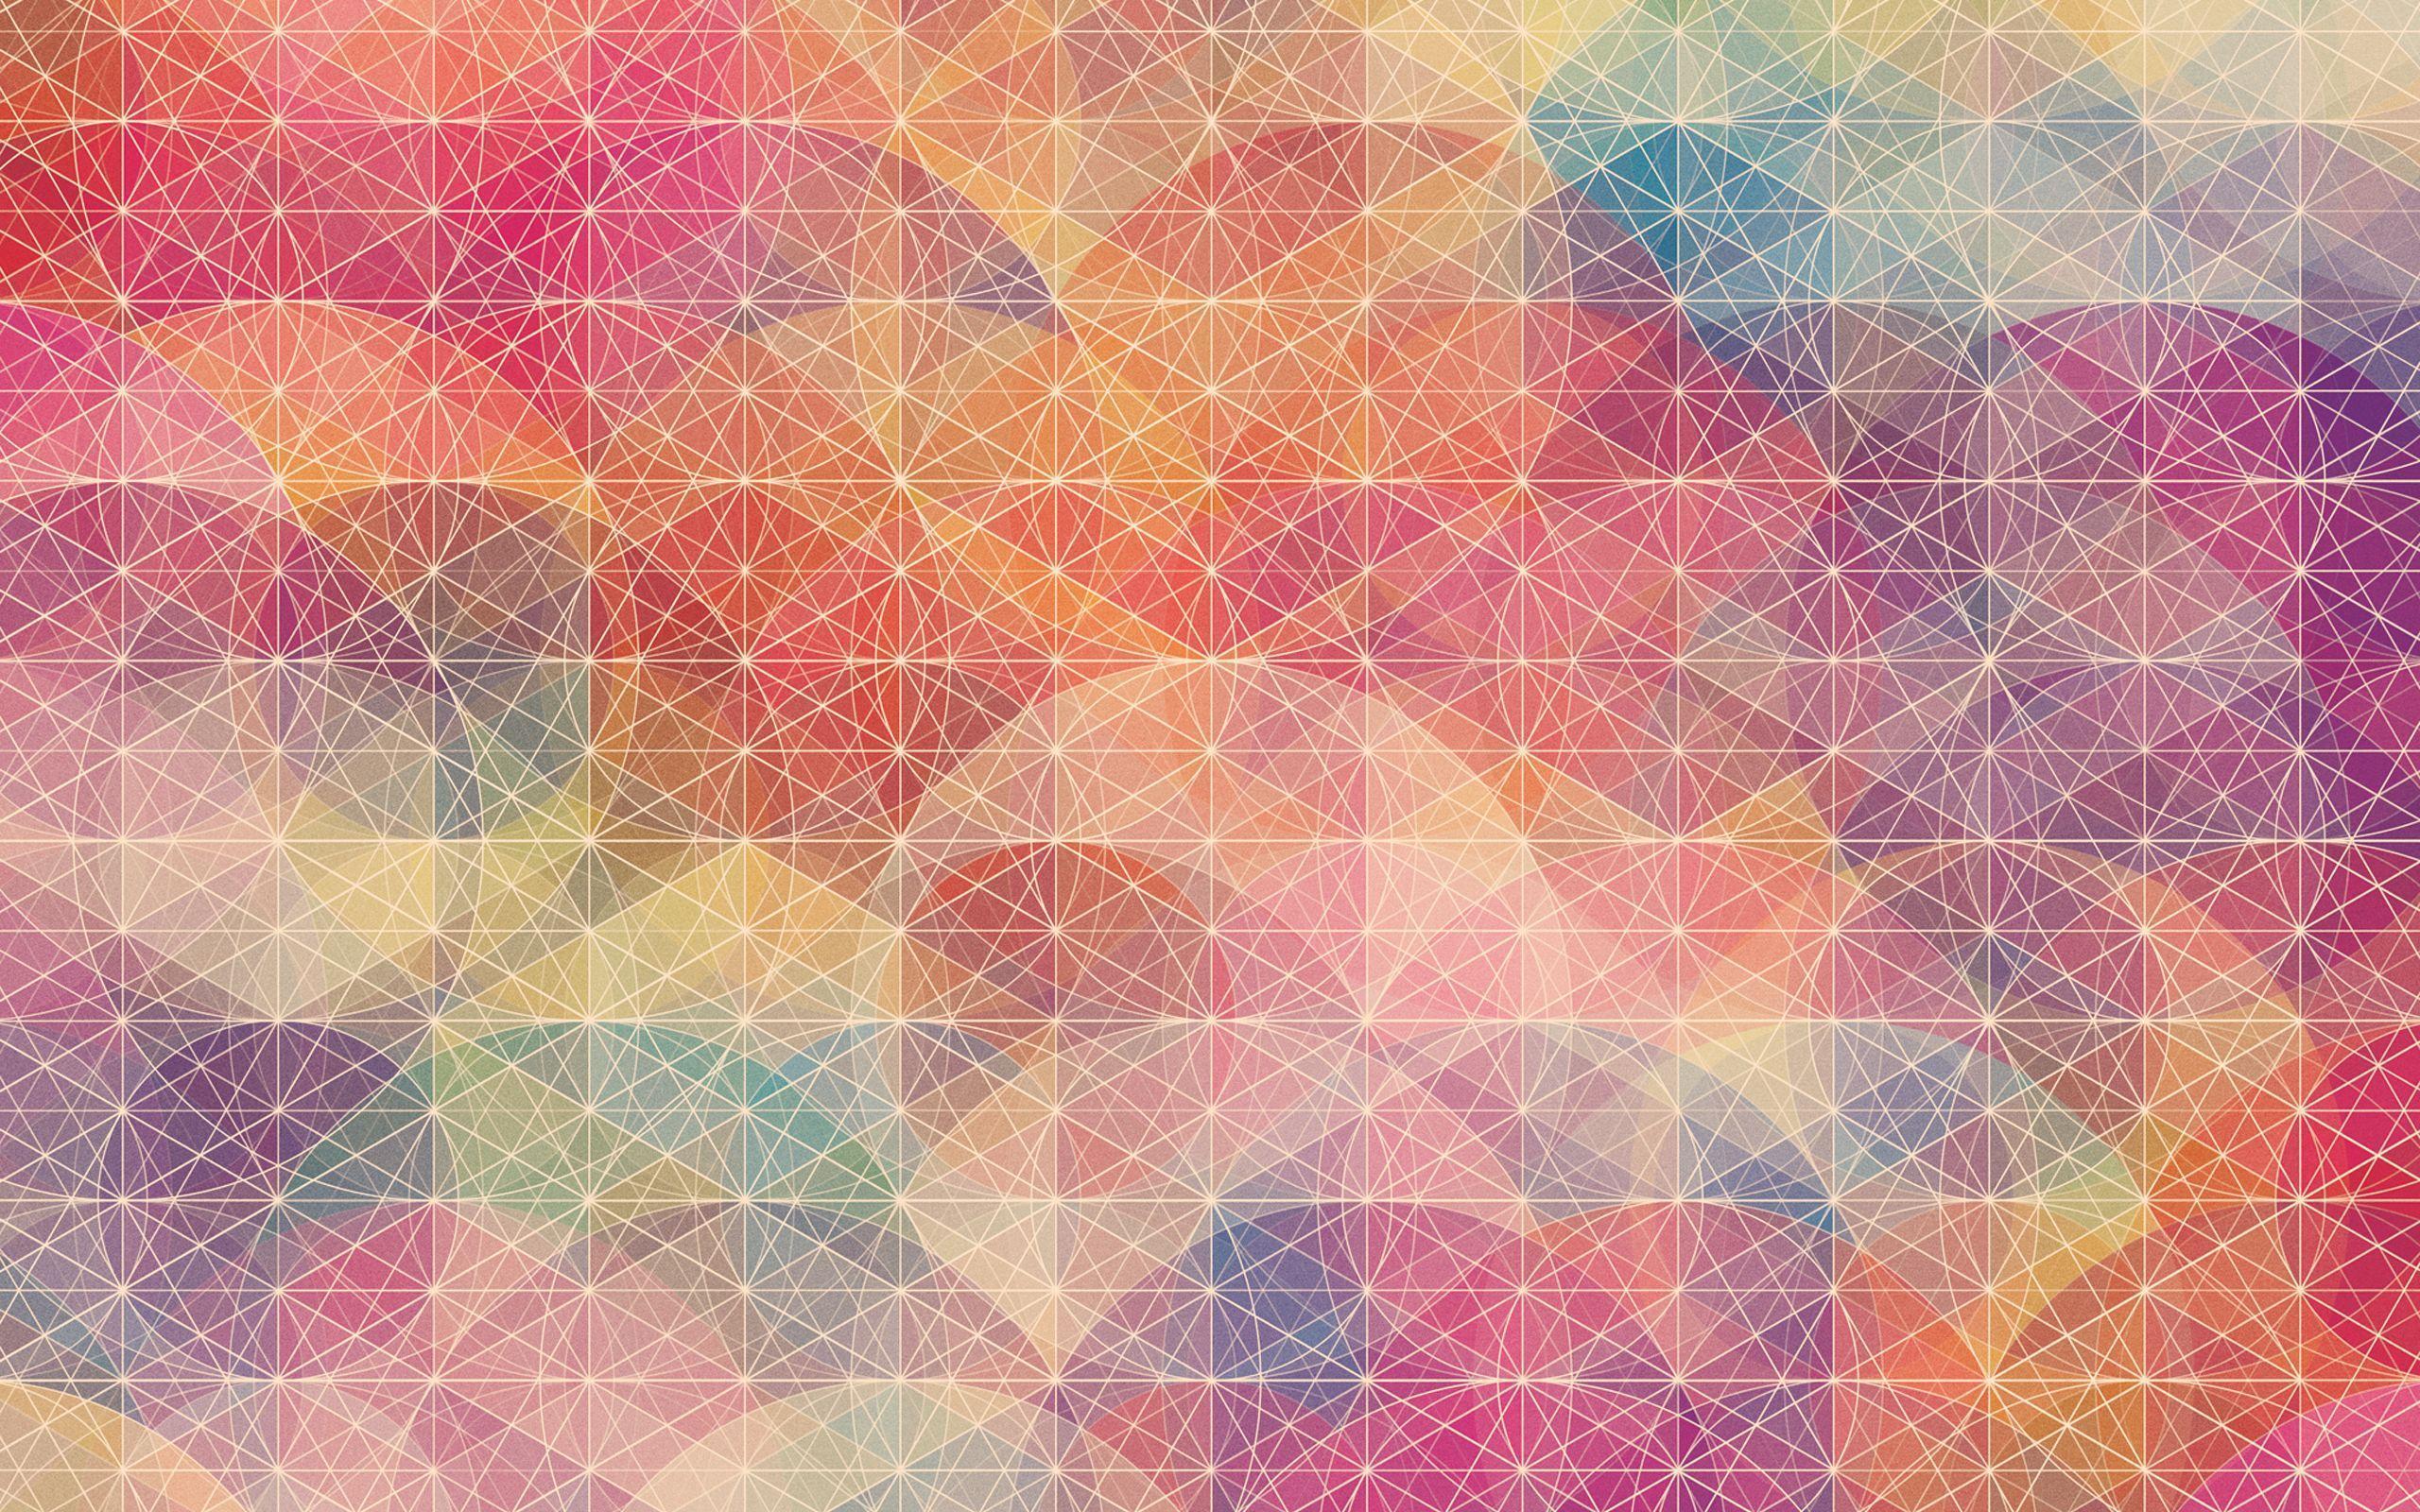 Pattern your home screen this Wallpaper Wednesday